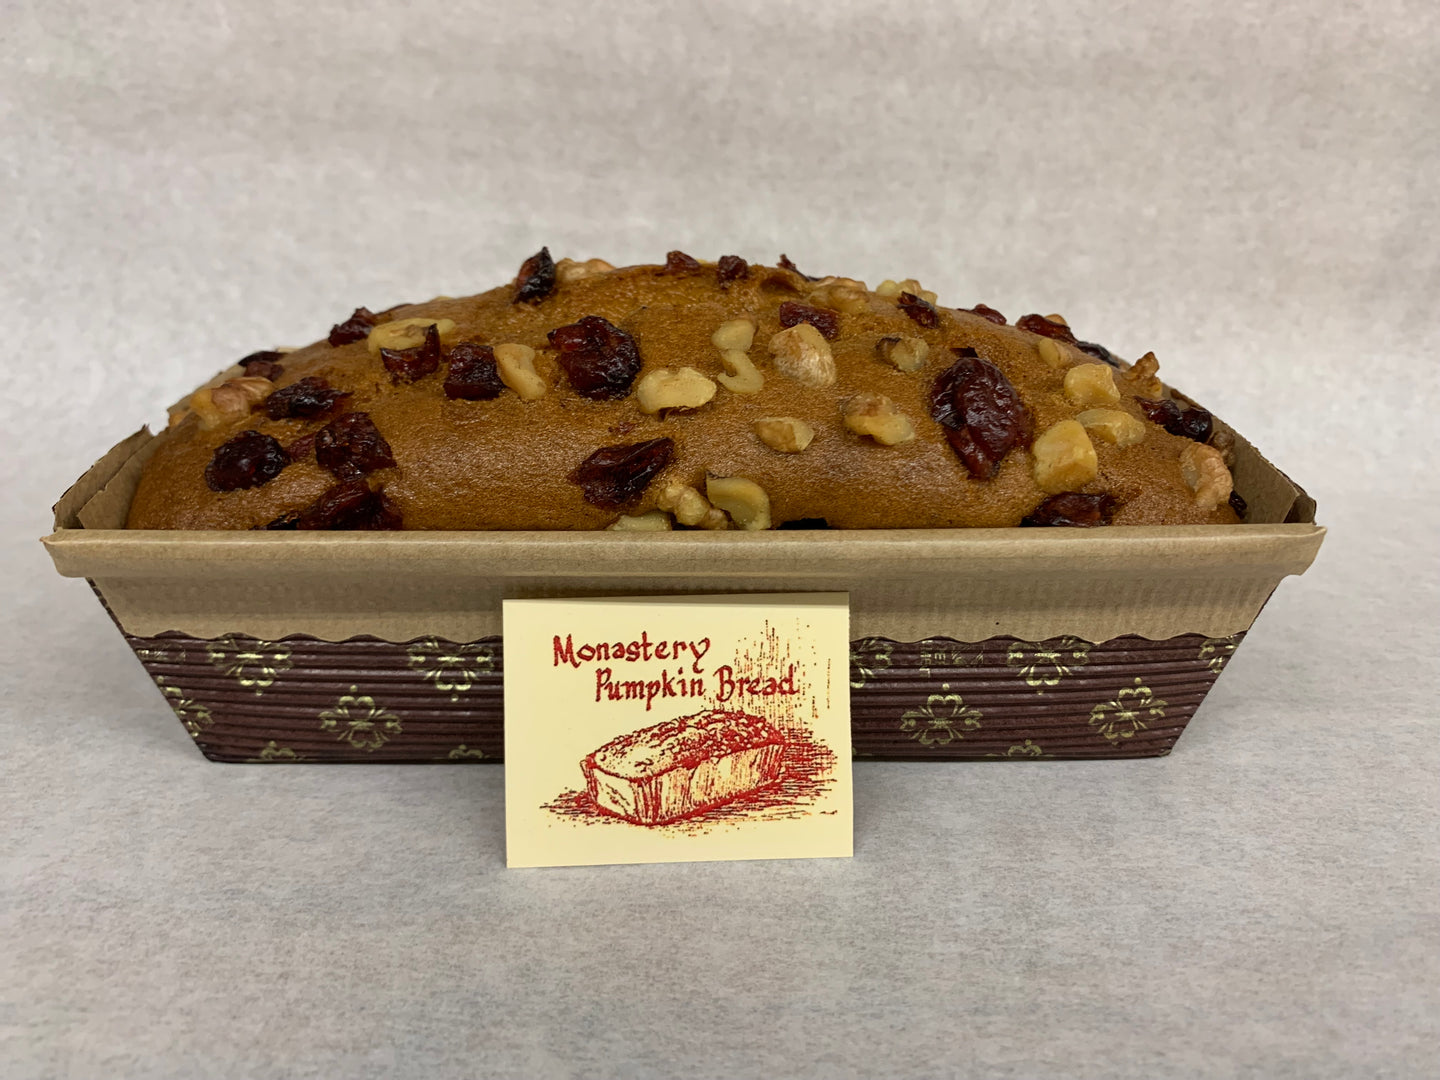 Pumpkin Bread Topped with Walnuts & Cranberries